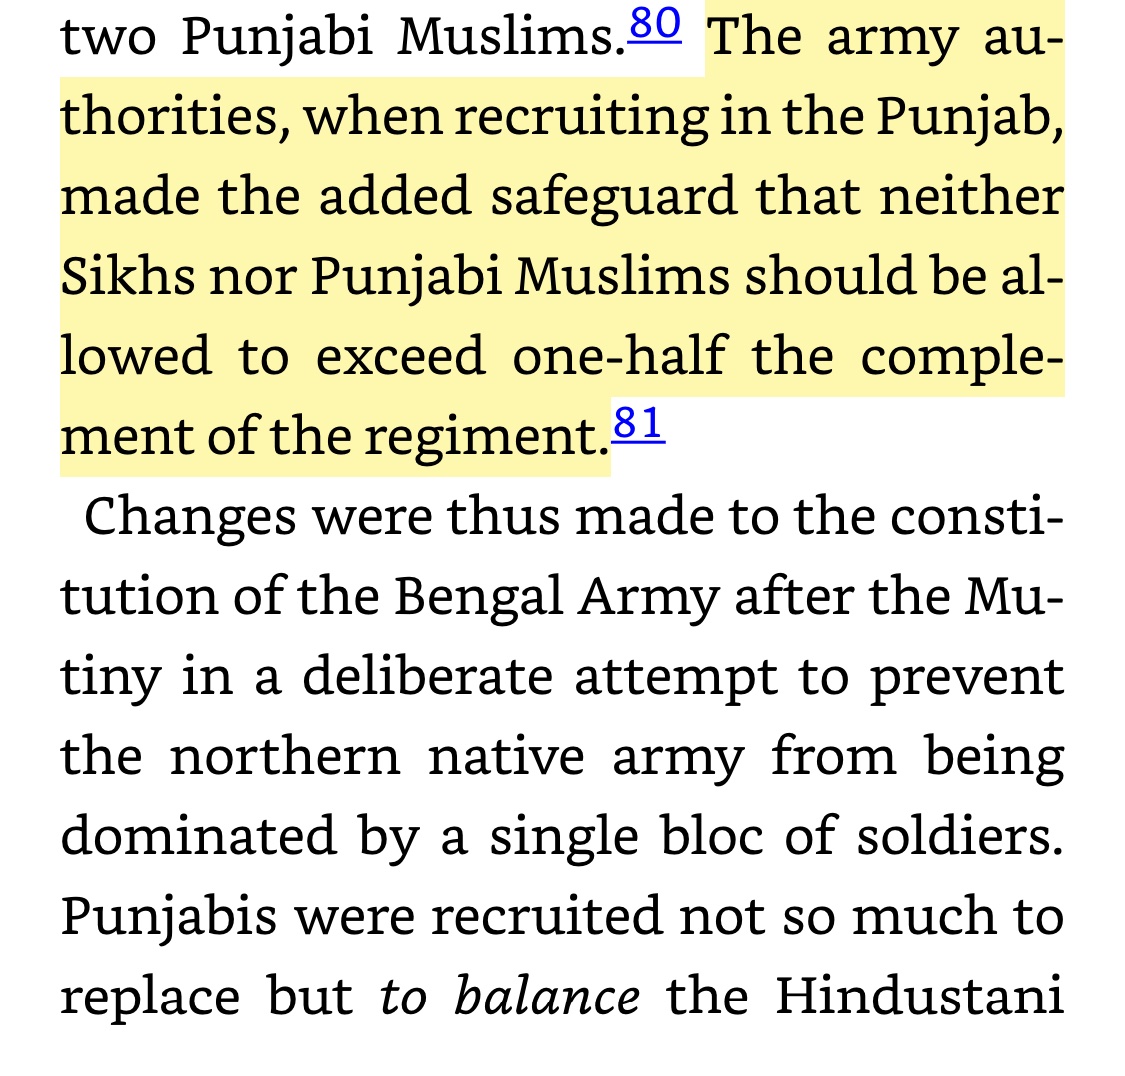 The main result of the Mutiny was that the British decided that neither Punjabis (as in 1849) nor Hindustanis (as in 1857) could be relied upon fully - so Punjabis were added as a counterweight. Their numbers were still restricted so as to prevent a “Punjabification” of the army.